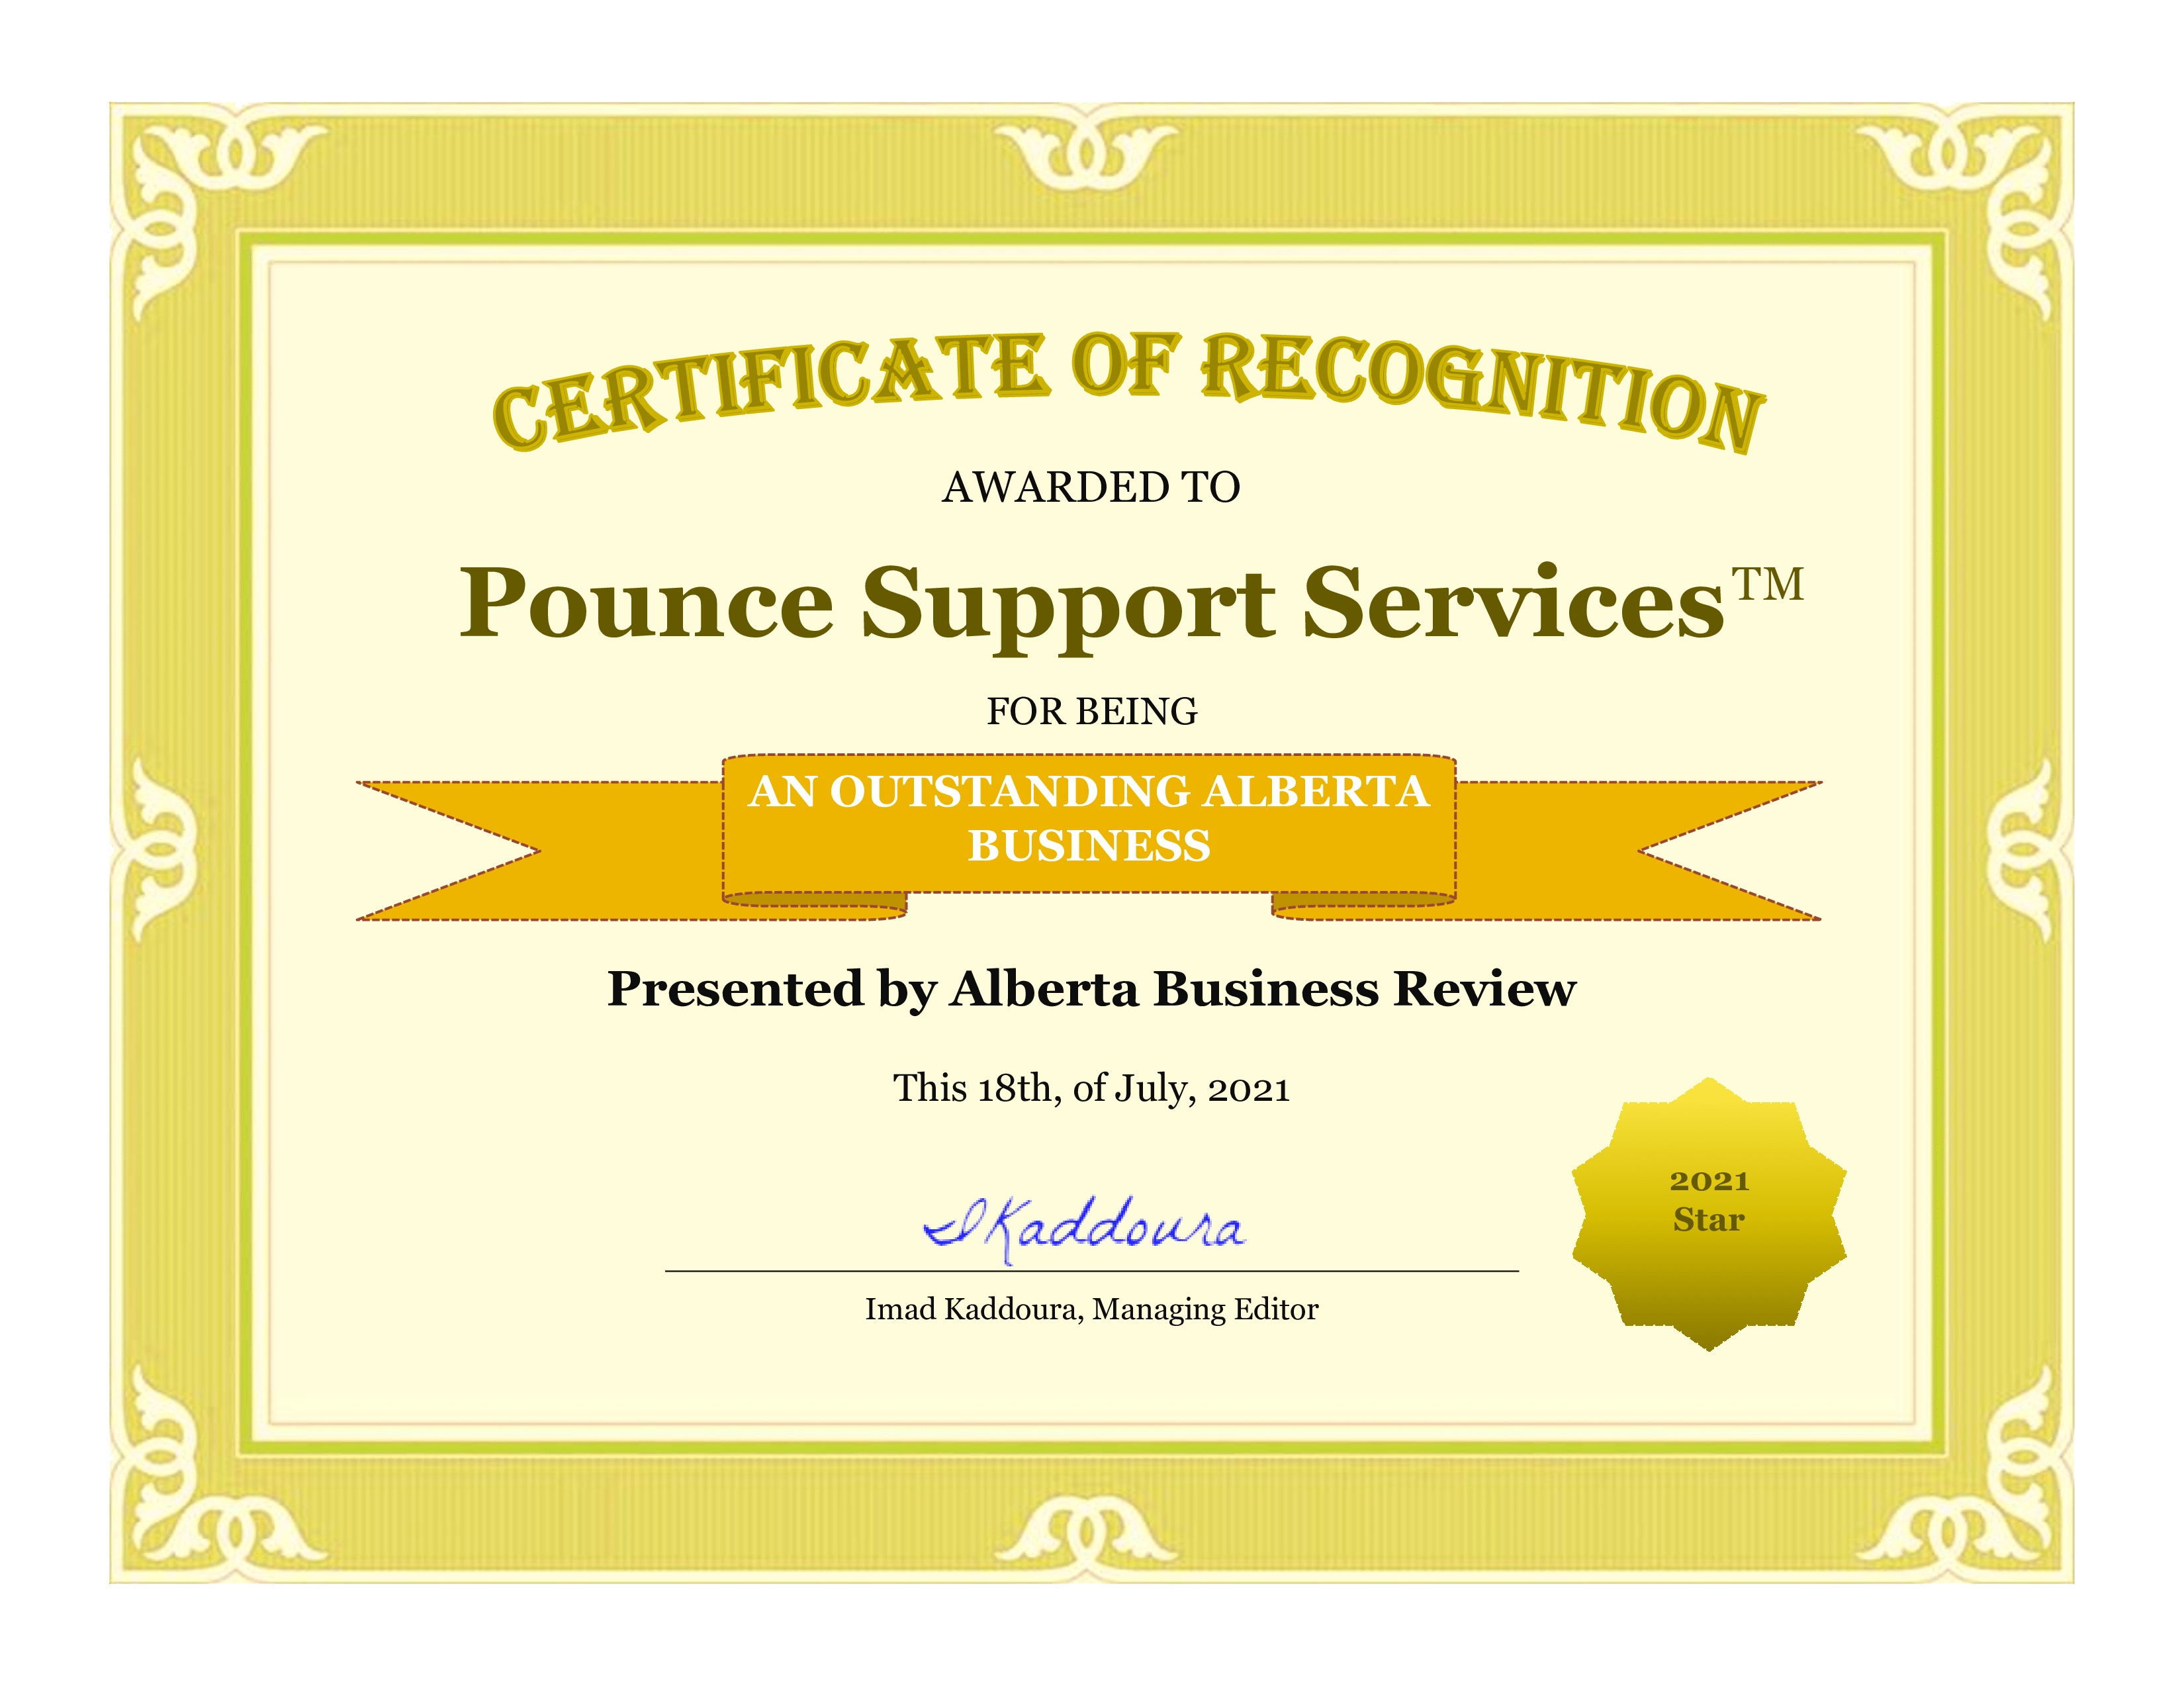 Certificate of Recognition Pounce Support Services TM